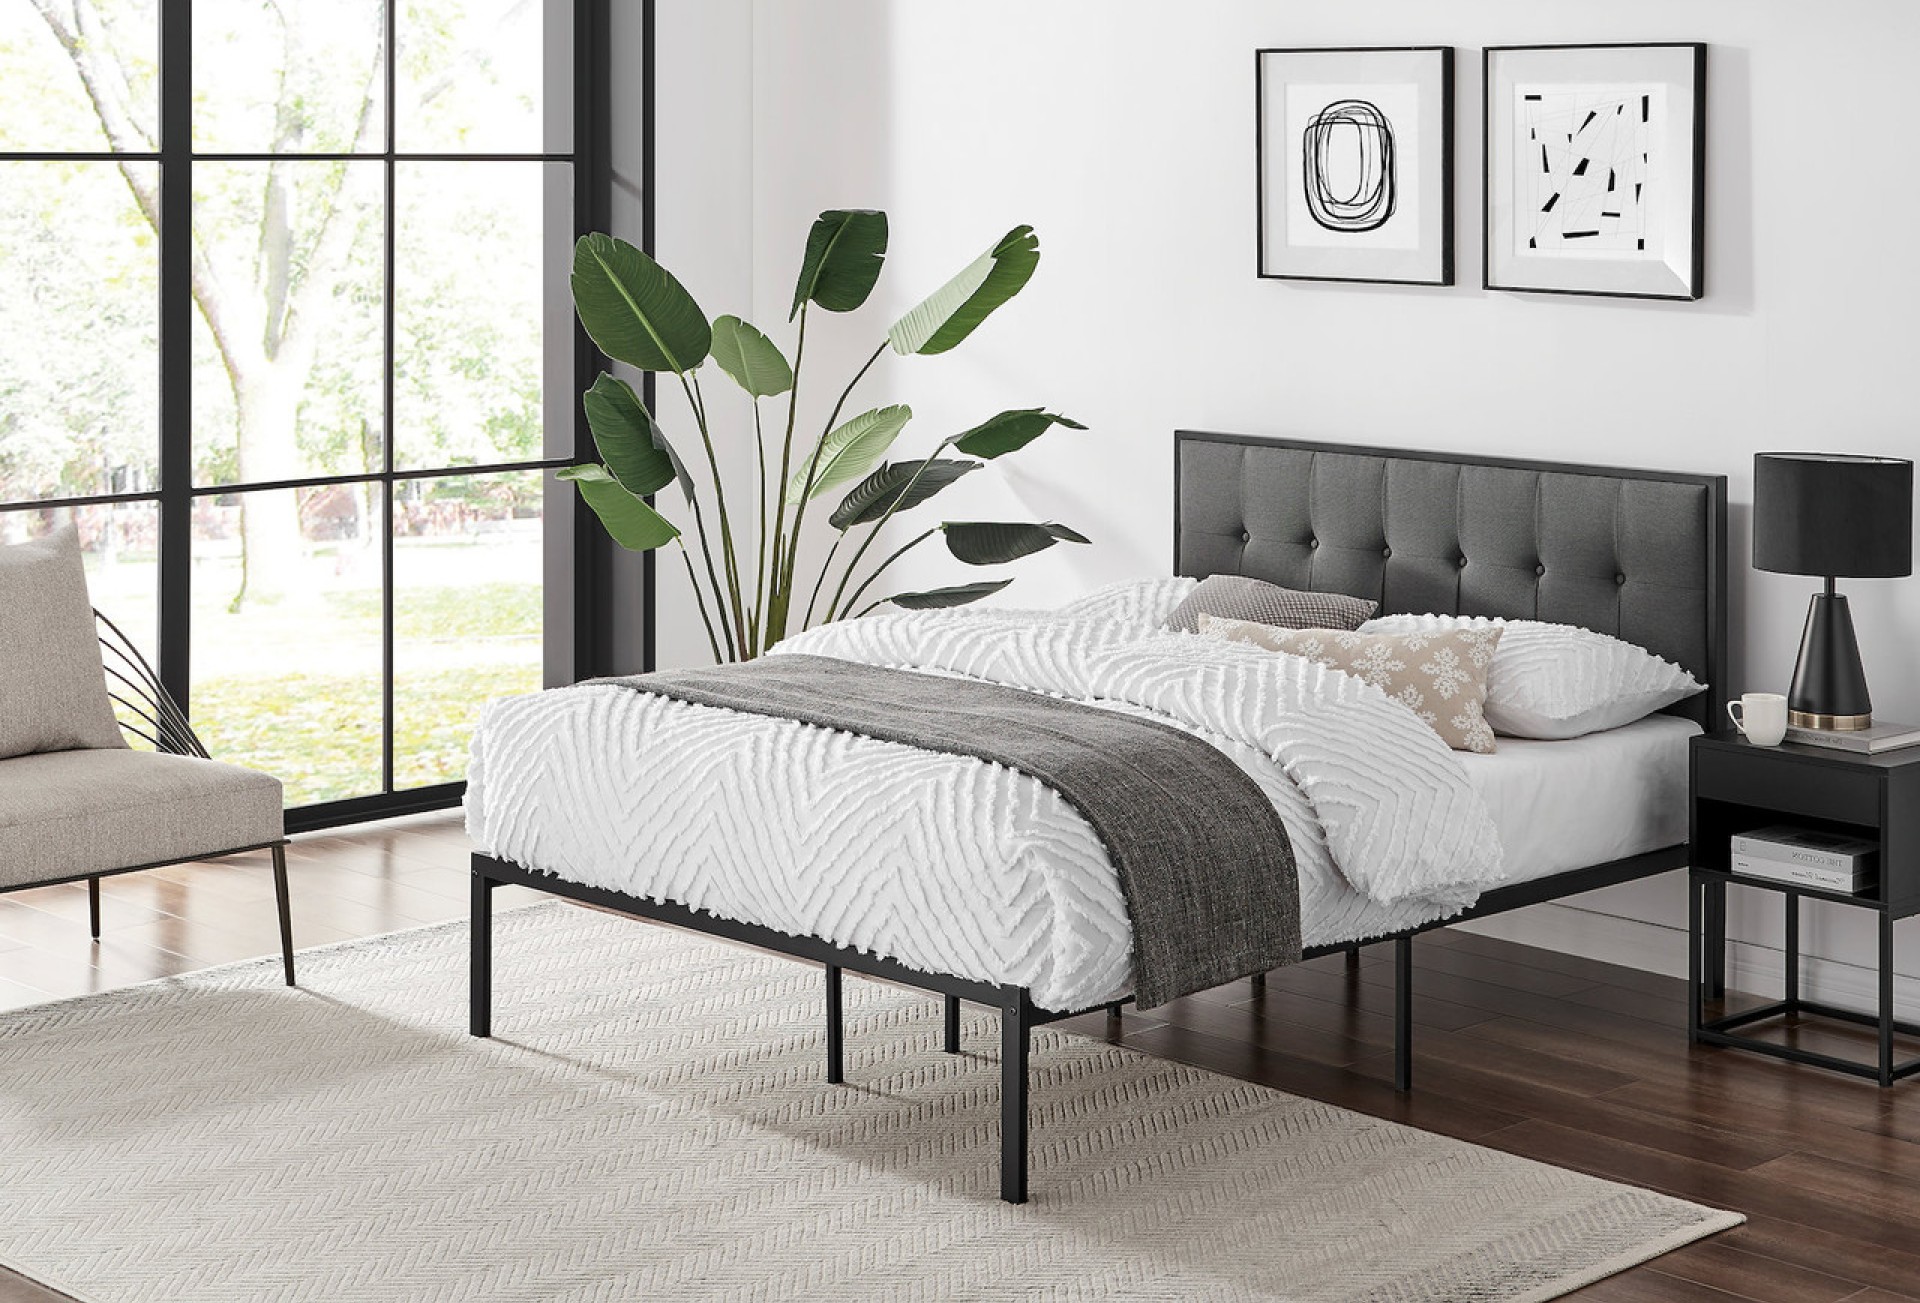 Maddison metal bed frame in back with grey upholstered headboard featuring button details